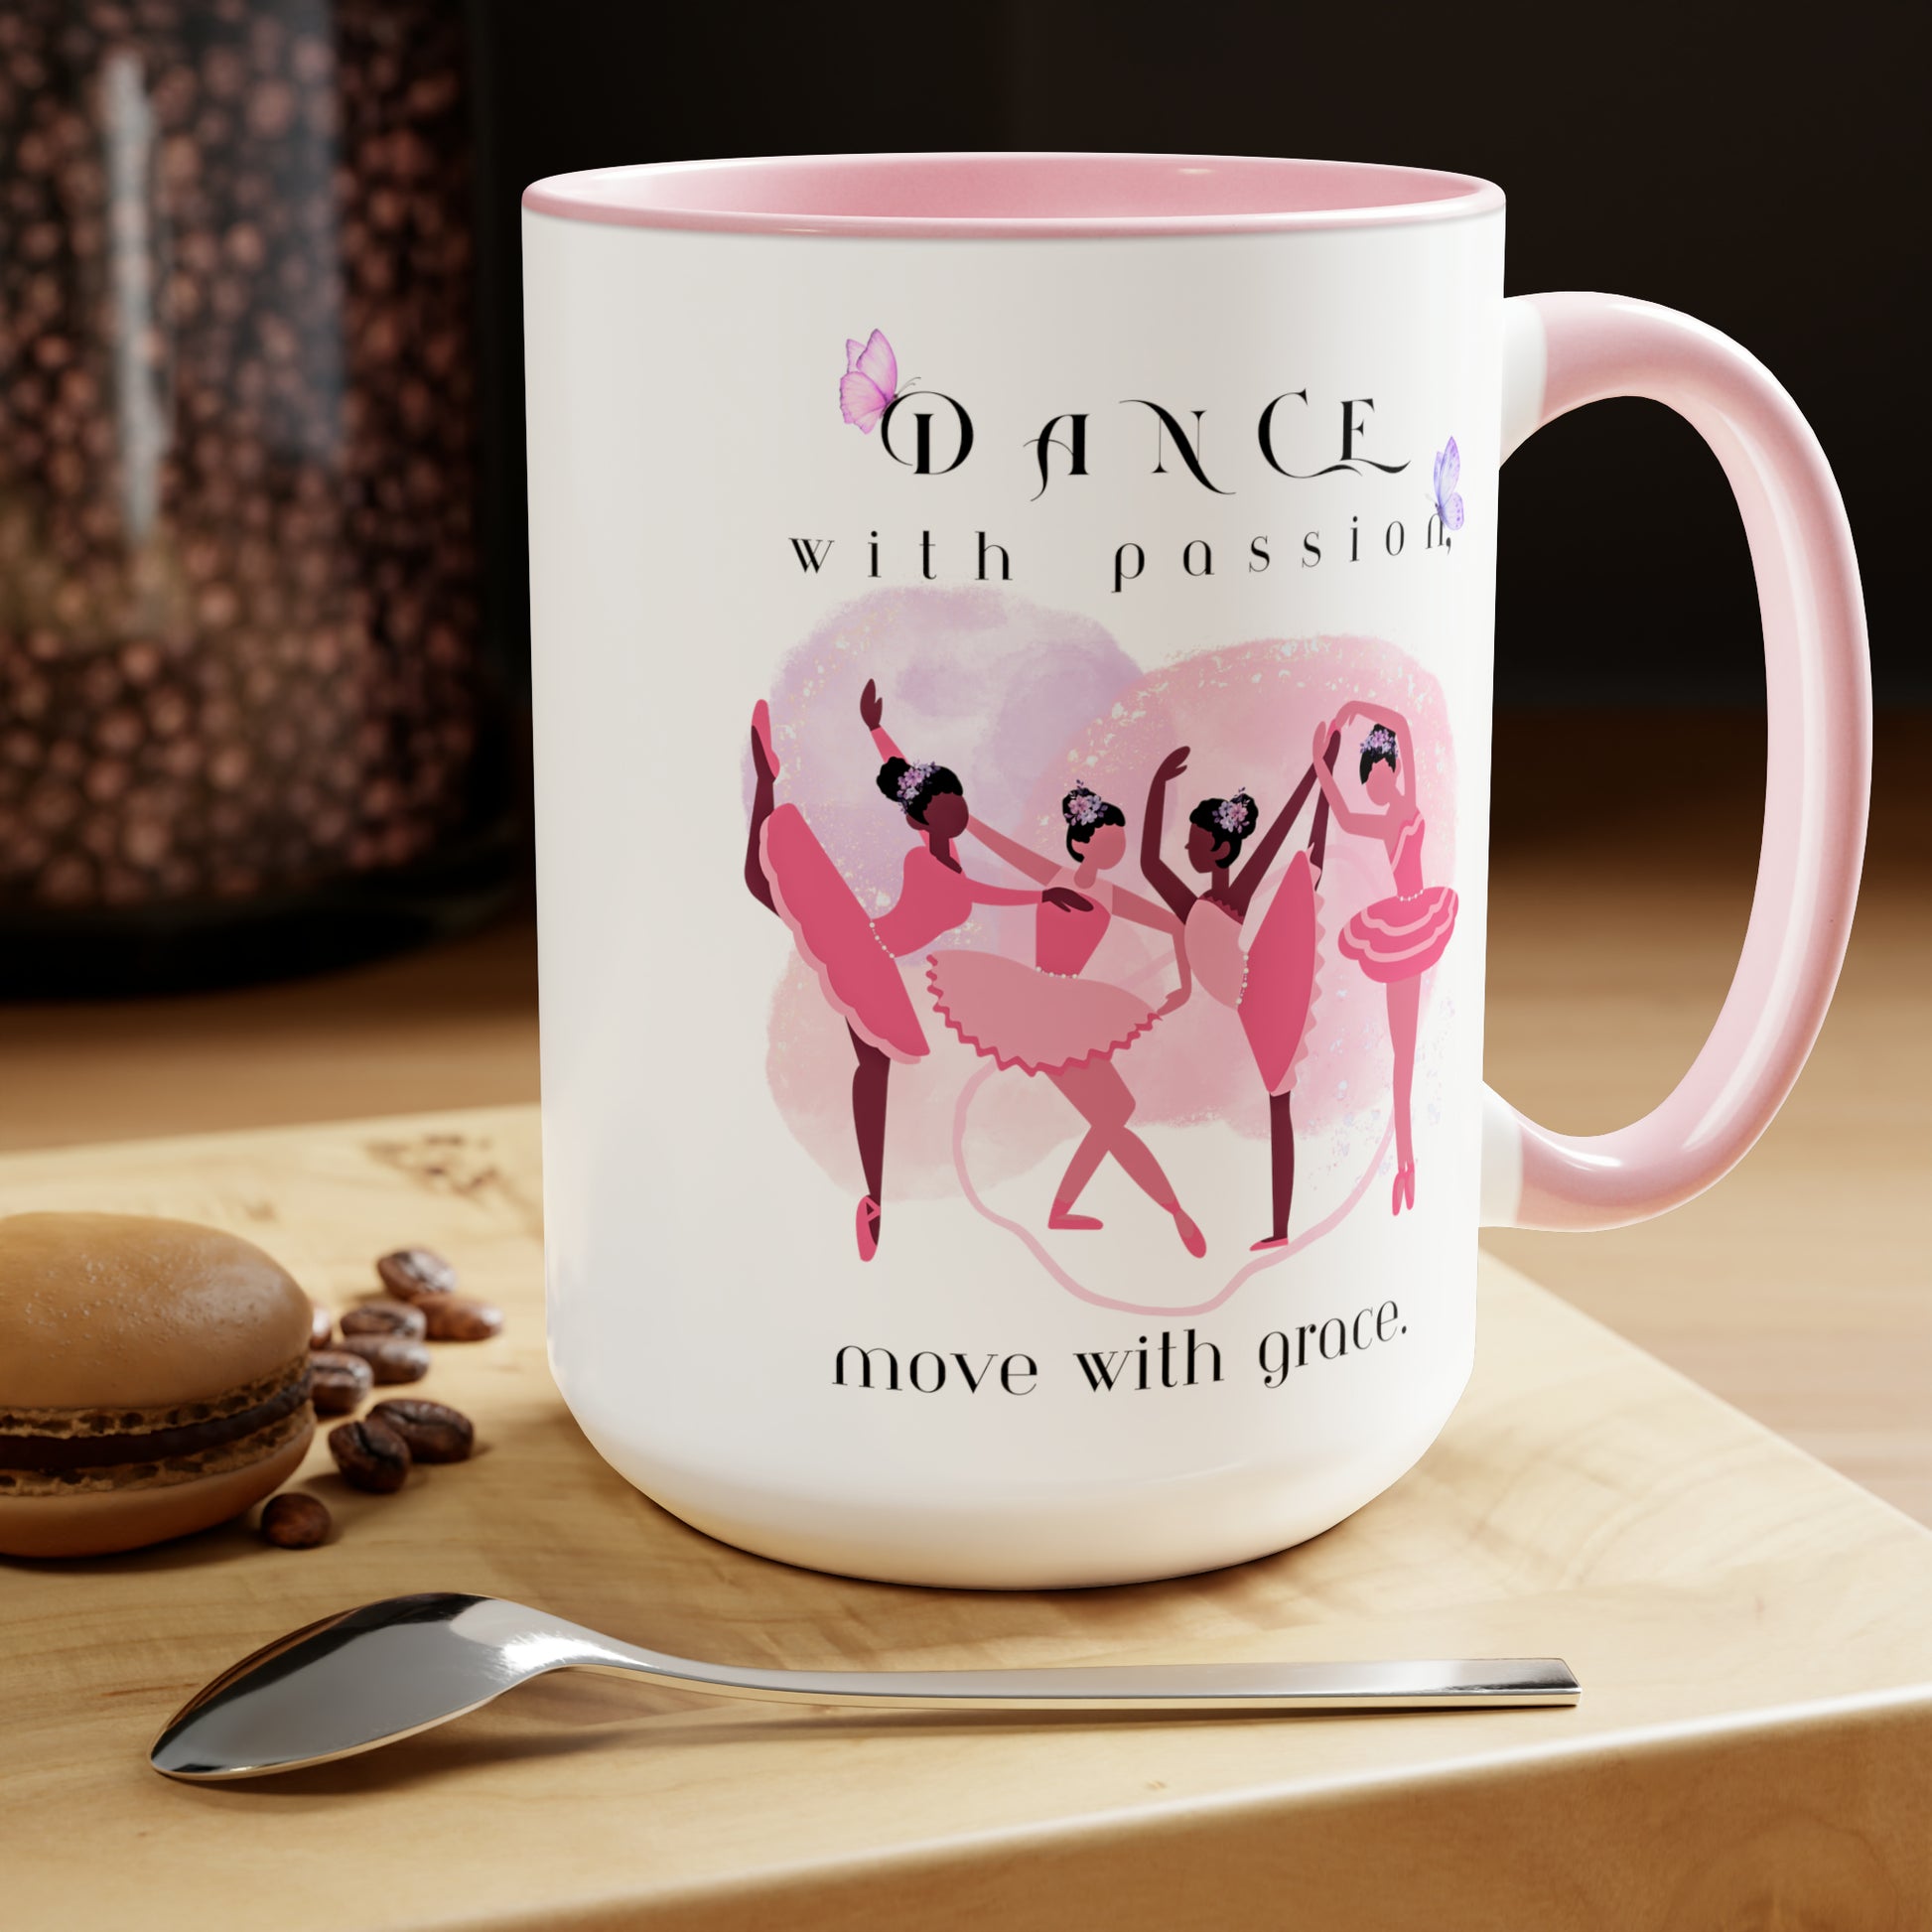 Two-Tone Coffee Mugs, 15oz - Dance with passion Ballerina - pink rim